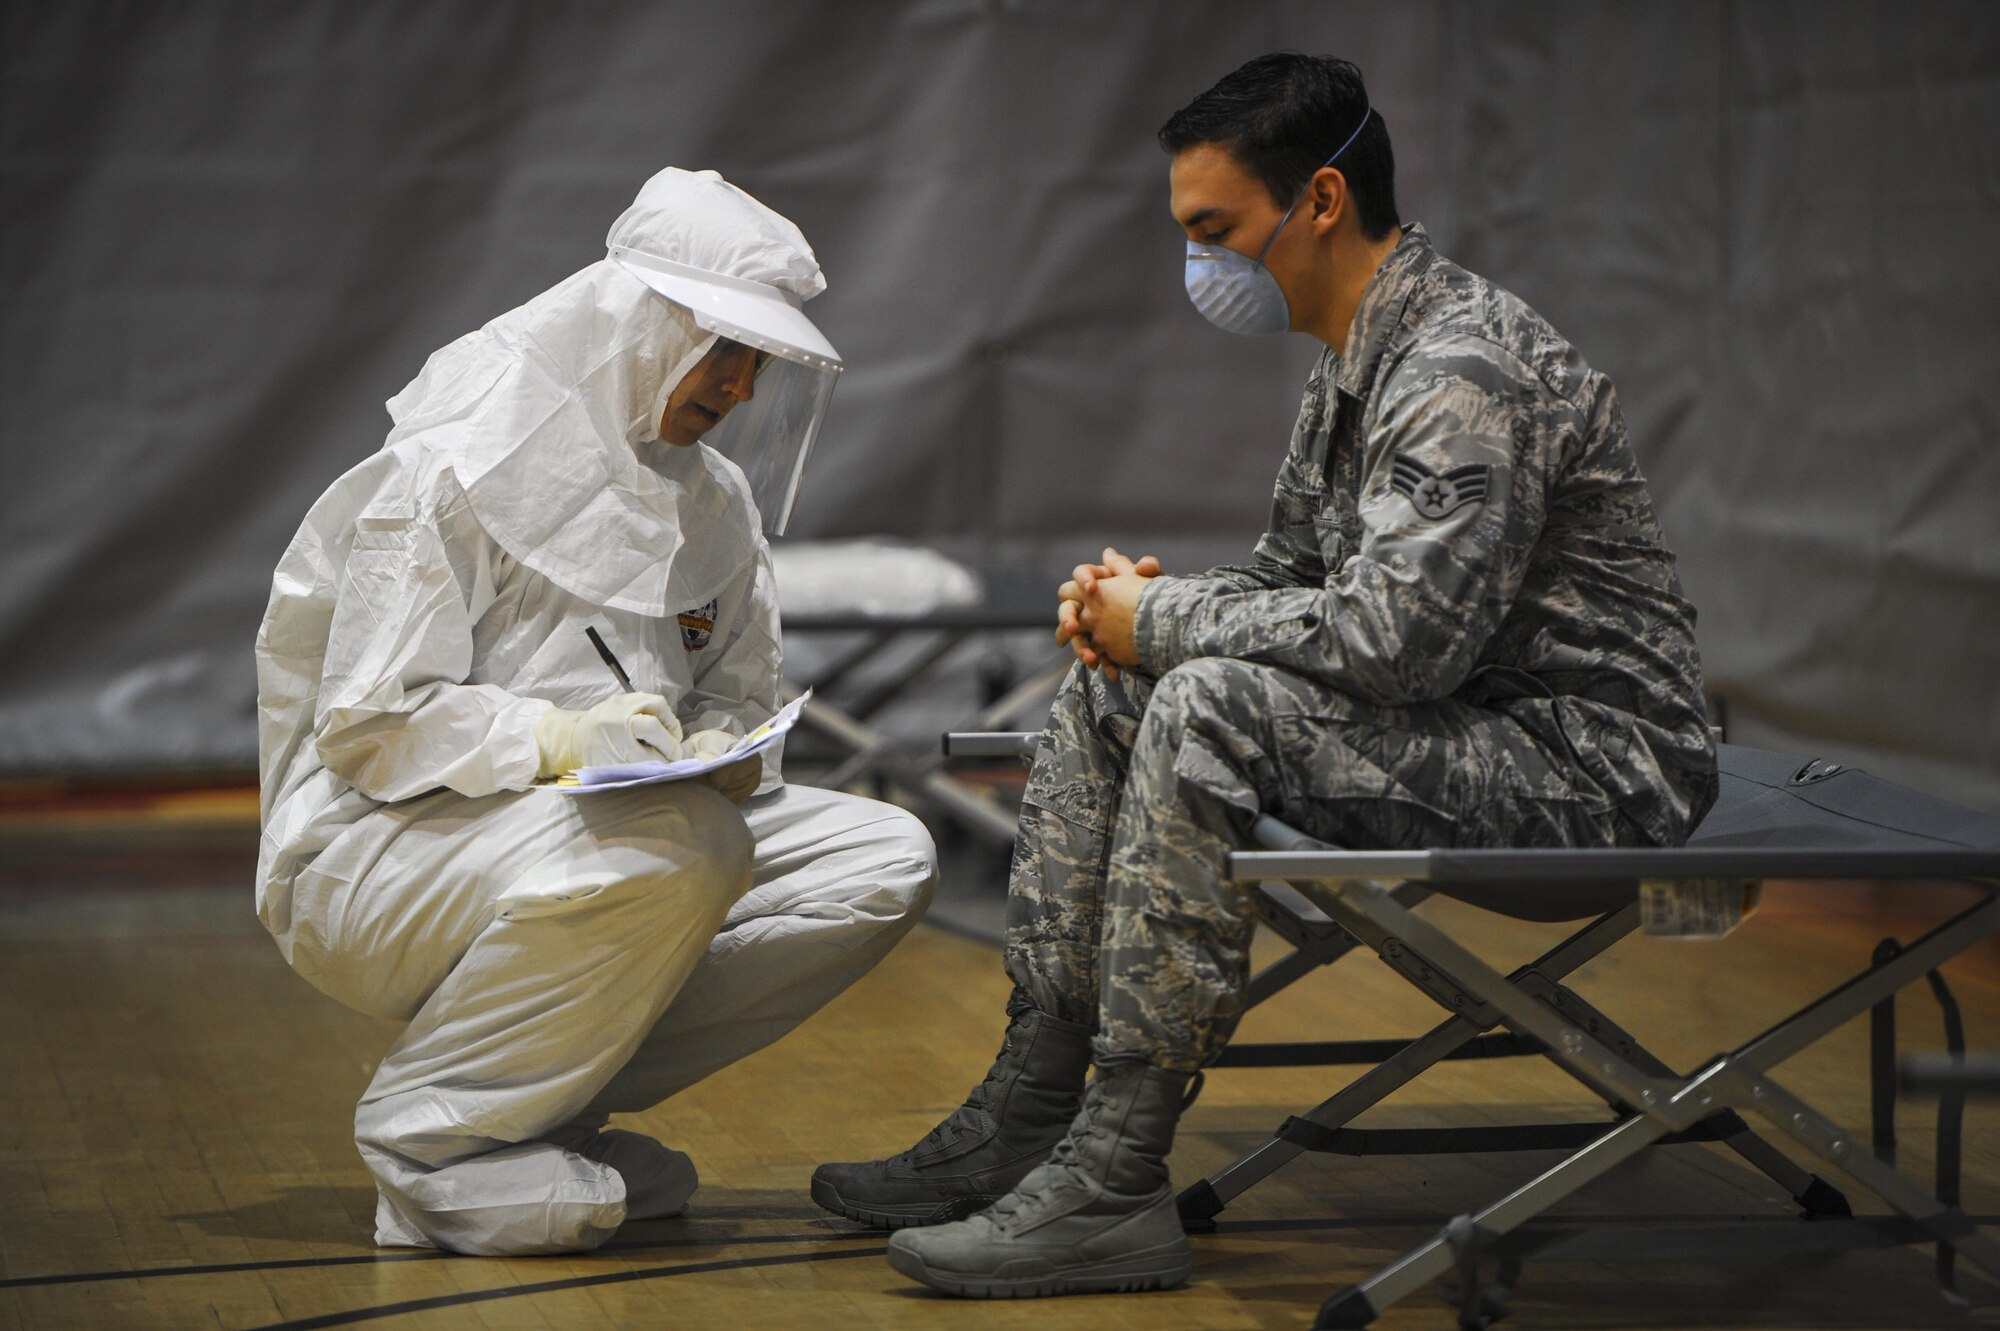 Senior Airman Magnus Russi, 1st Special Operations Medical Group aerospace medical technician, reports his simulated symptoms to Capt. Dawn Souza, 1st SOMDG nurse, during a disease containment exercise on Hurlburt Field, Fla., Feb. 4, 2015. The medical staff focused on the interaction and coordination between multiple units that would be involved in responding to a disease outbreak. (U.S. Air Force photo/Senior Airman Christopher Callaway)